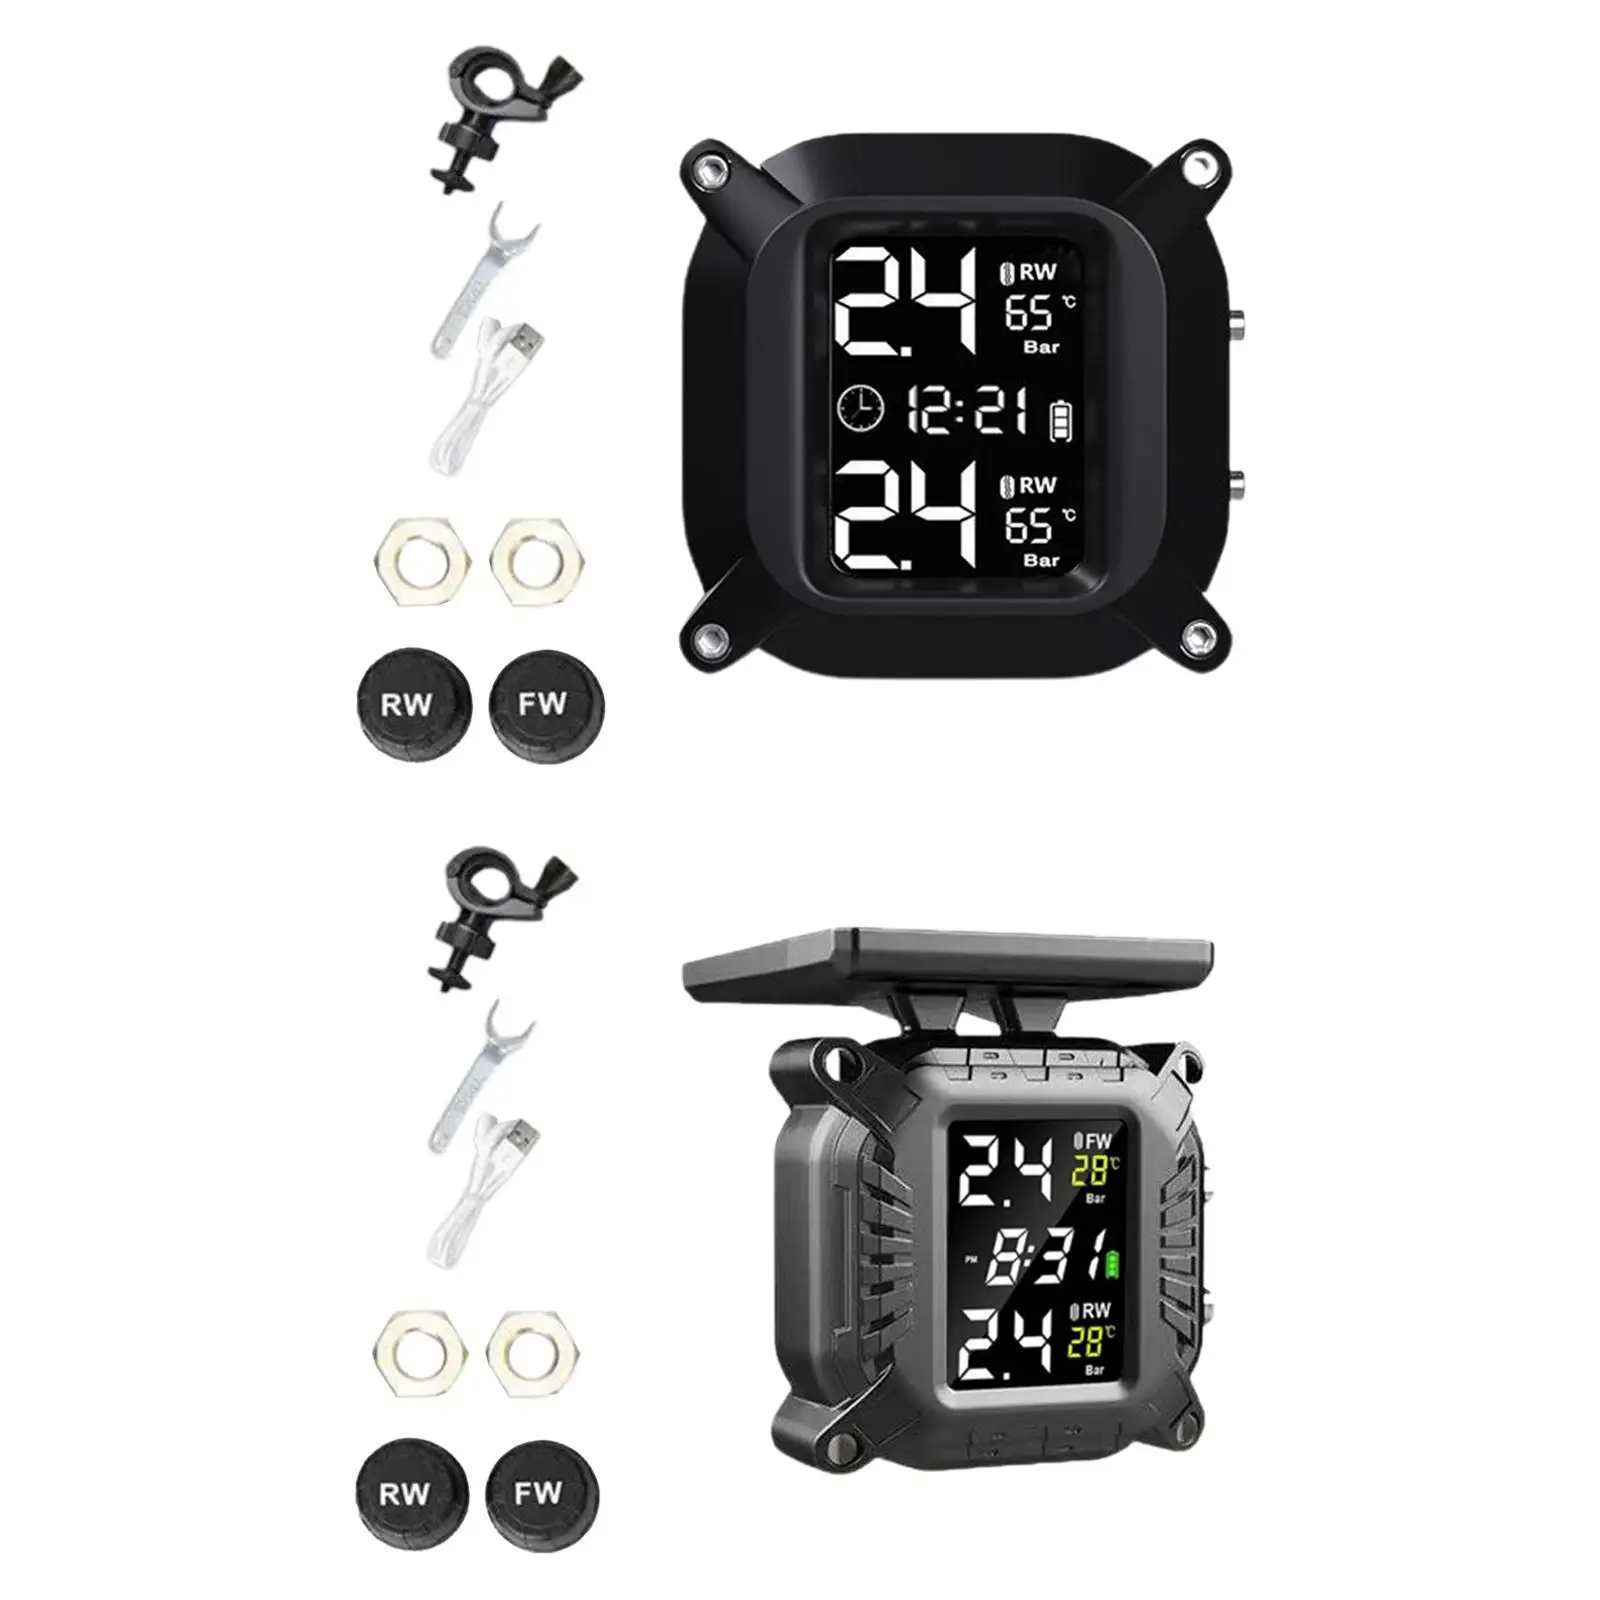 Tire Pressure Monitoring System Temperature Alarm Waterproof Smart 1100mAh with 2 Sensors Large LCD TPMS for Motorcycles